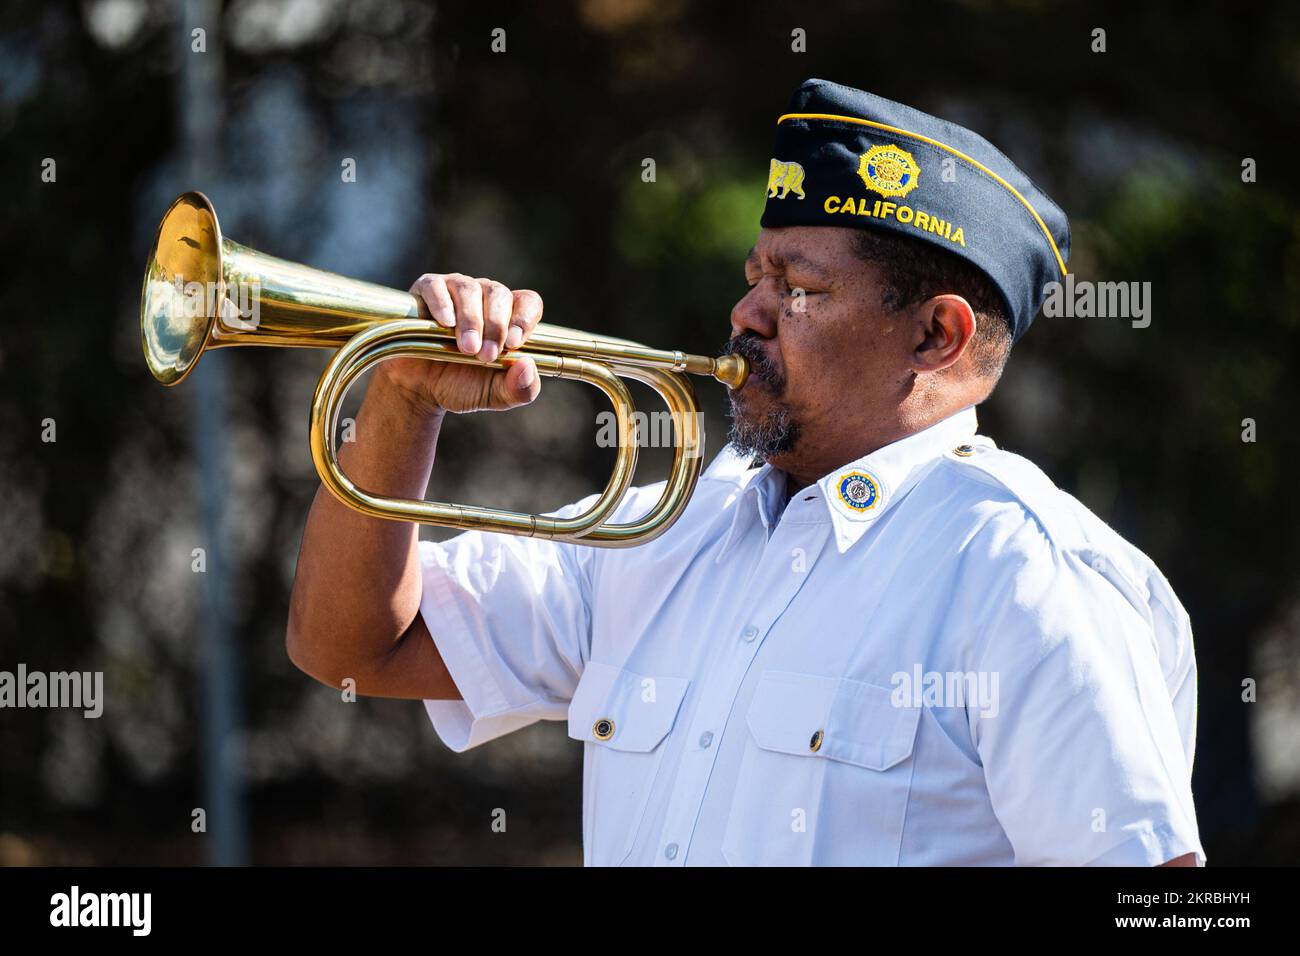 A member of the American Legion Post 534 plays the bugle during a Remembrance Day ceremony at Pine Grove Cemetery in Orcutt, Calif., Nov. 11, 2022. Combined Force Space Component Command members from the U.S., U.K., Australia, and Canada participated in the ceremony, held by the American Legion Post 534, which was a tribute to those who gave their lives in World War I, and to all the men and women who have served since. Stock Photo